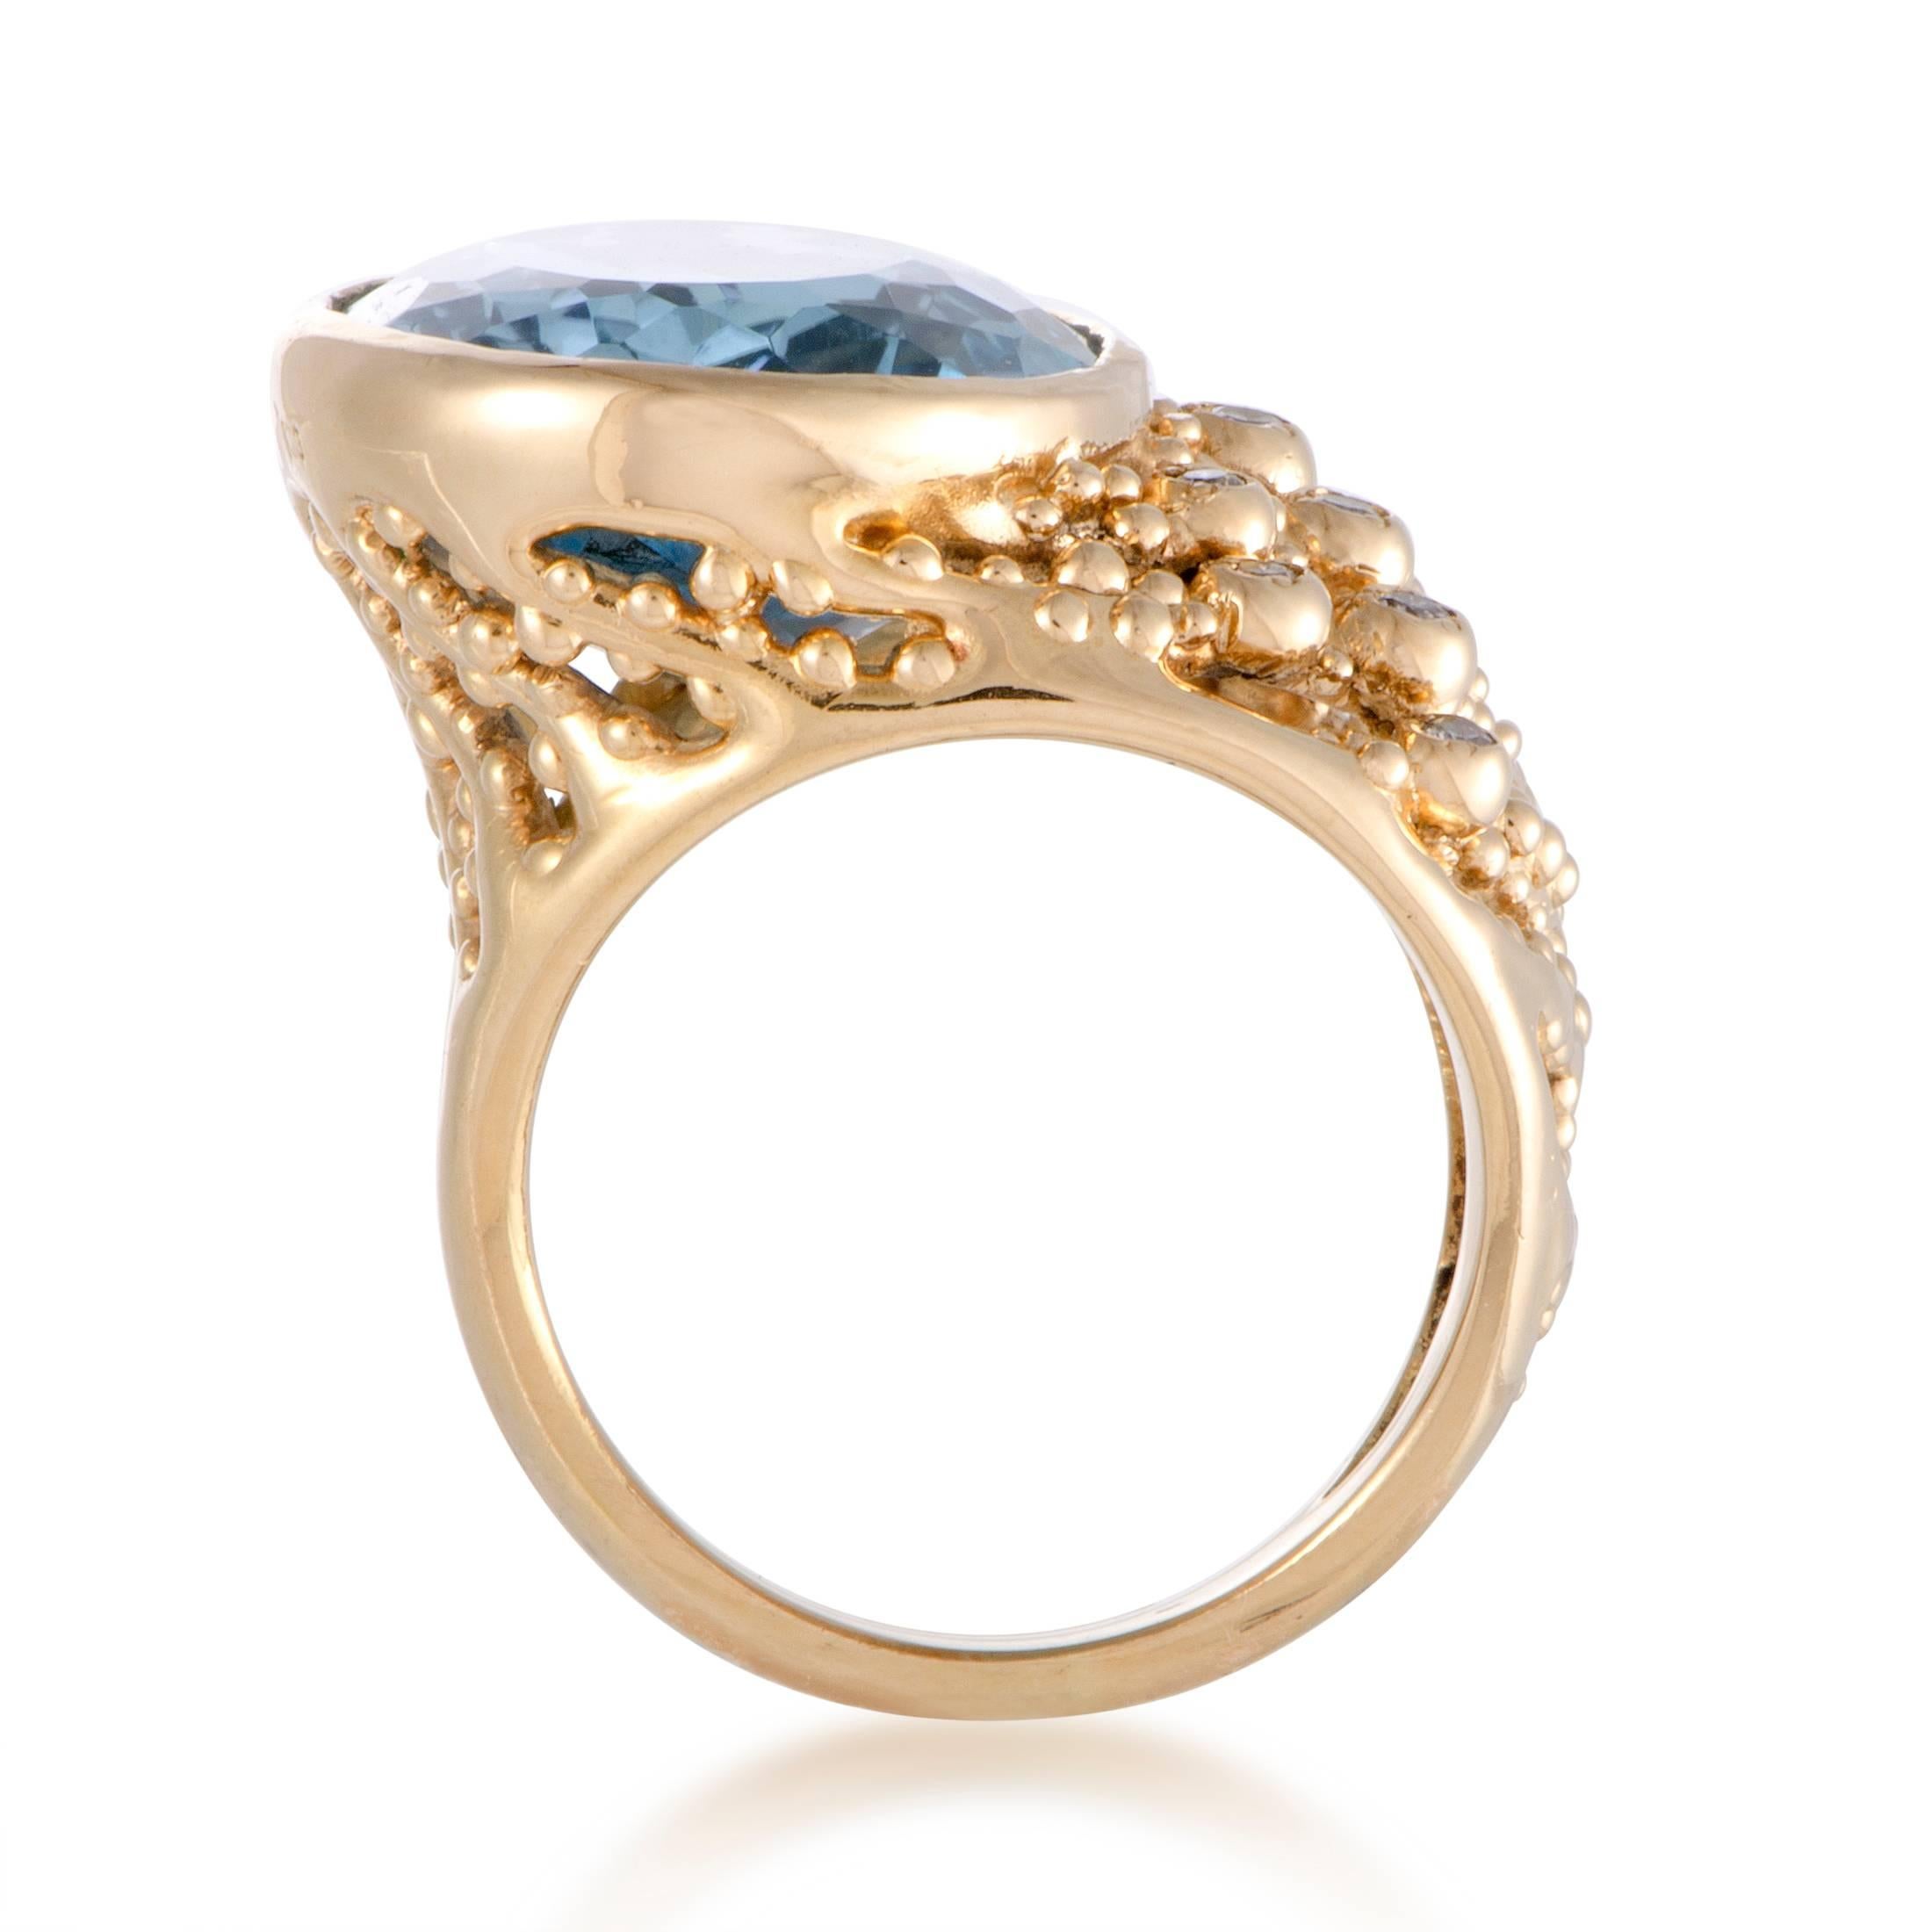 Intricate design is presented splendidly in this ring made of radiant 18K yellow gold that features exquisite craftsmanship and compelling décor. The ring boasts a total of 0.11 carats of diamonds that accentuate the stunning topaz weighing 20.07